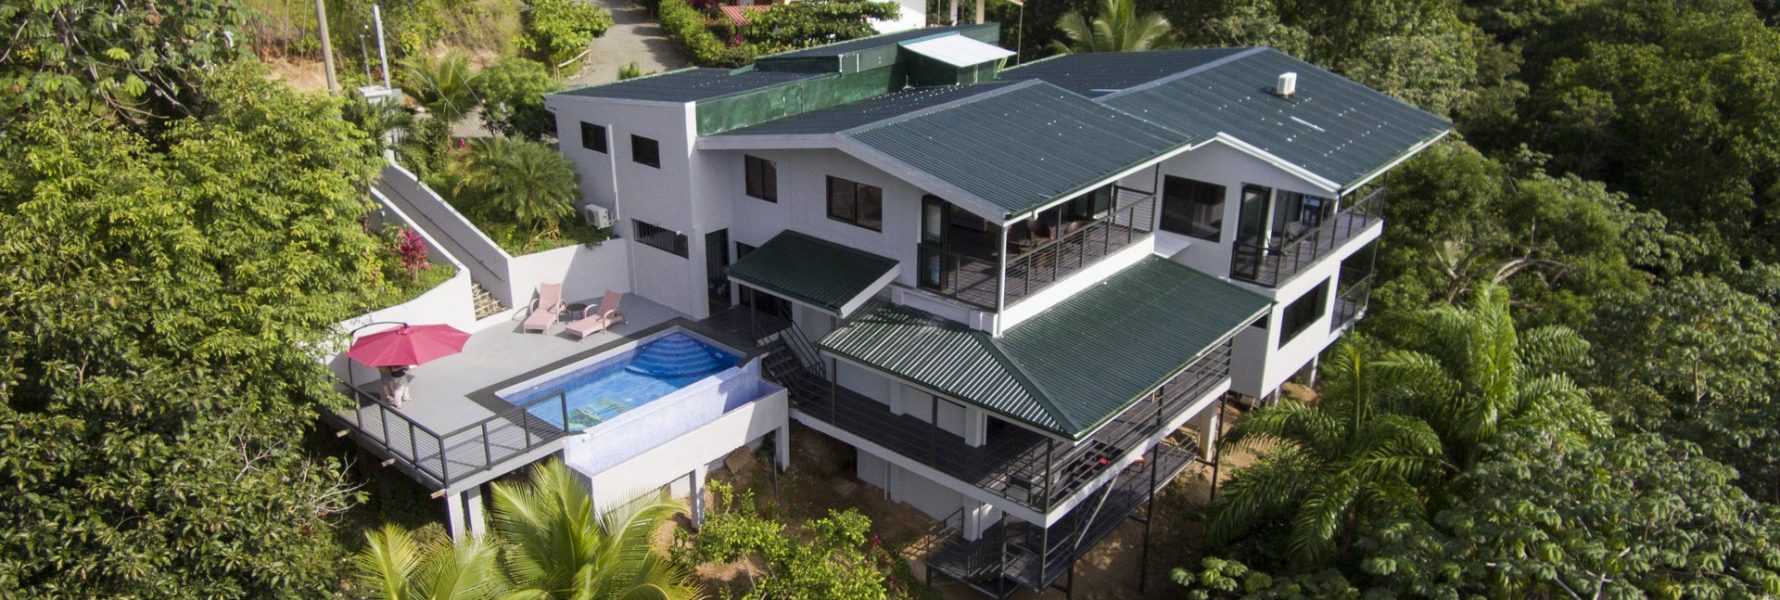 A nice aerial shot of the Vacation Villa you will be staying in. This multi-level home has lots to offer you when Visiting Costa Rica! 